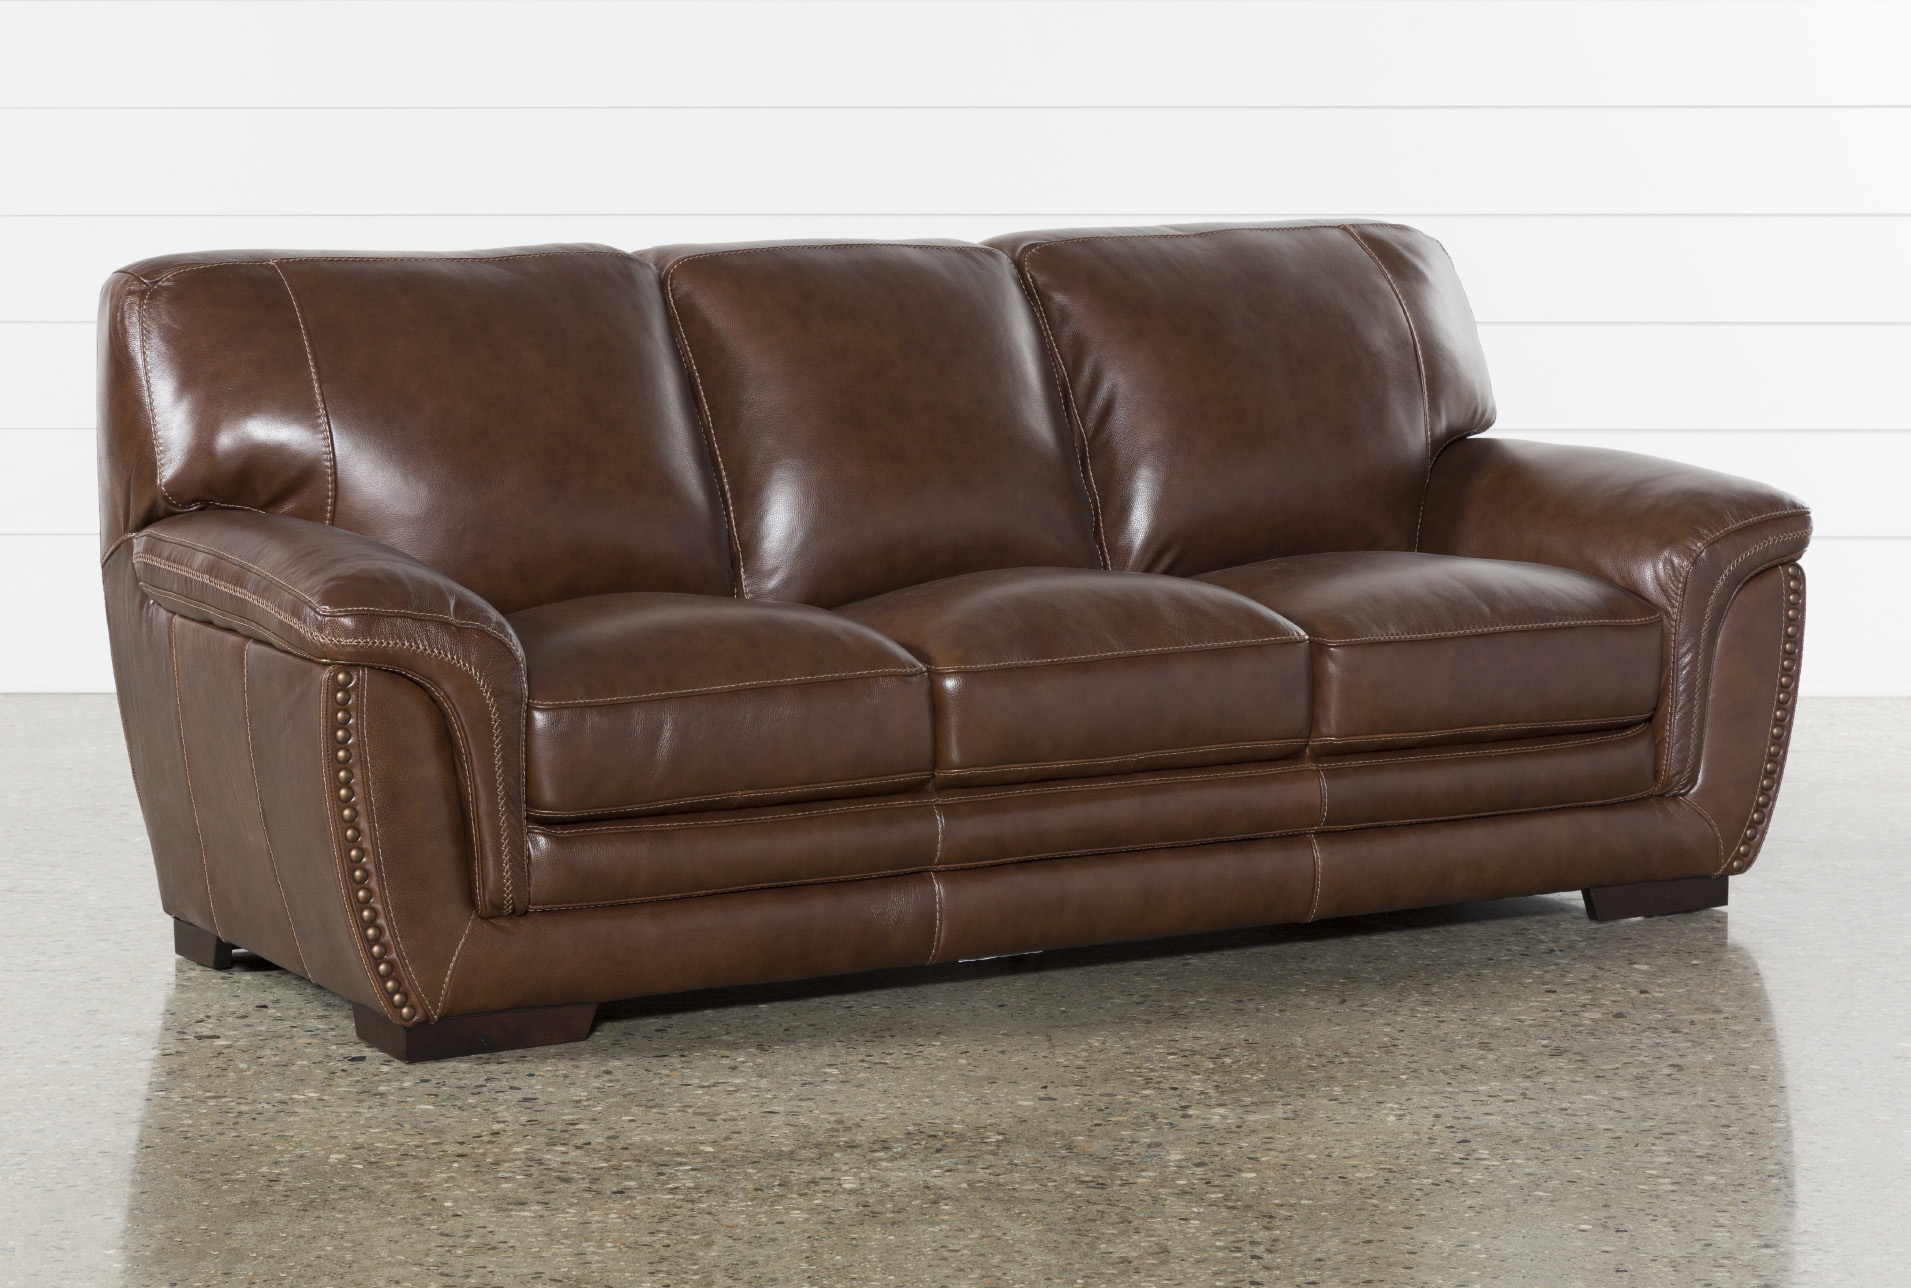 leather sofa brown tufted southern furniture ellyson